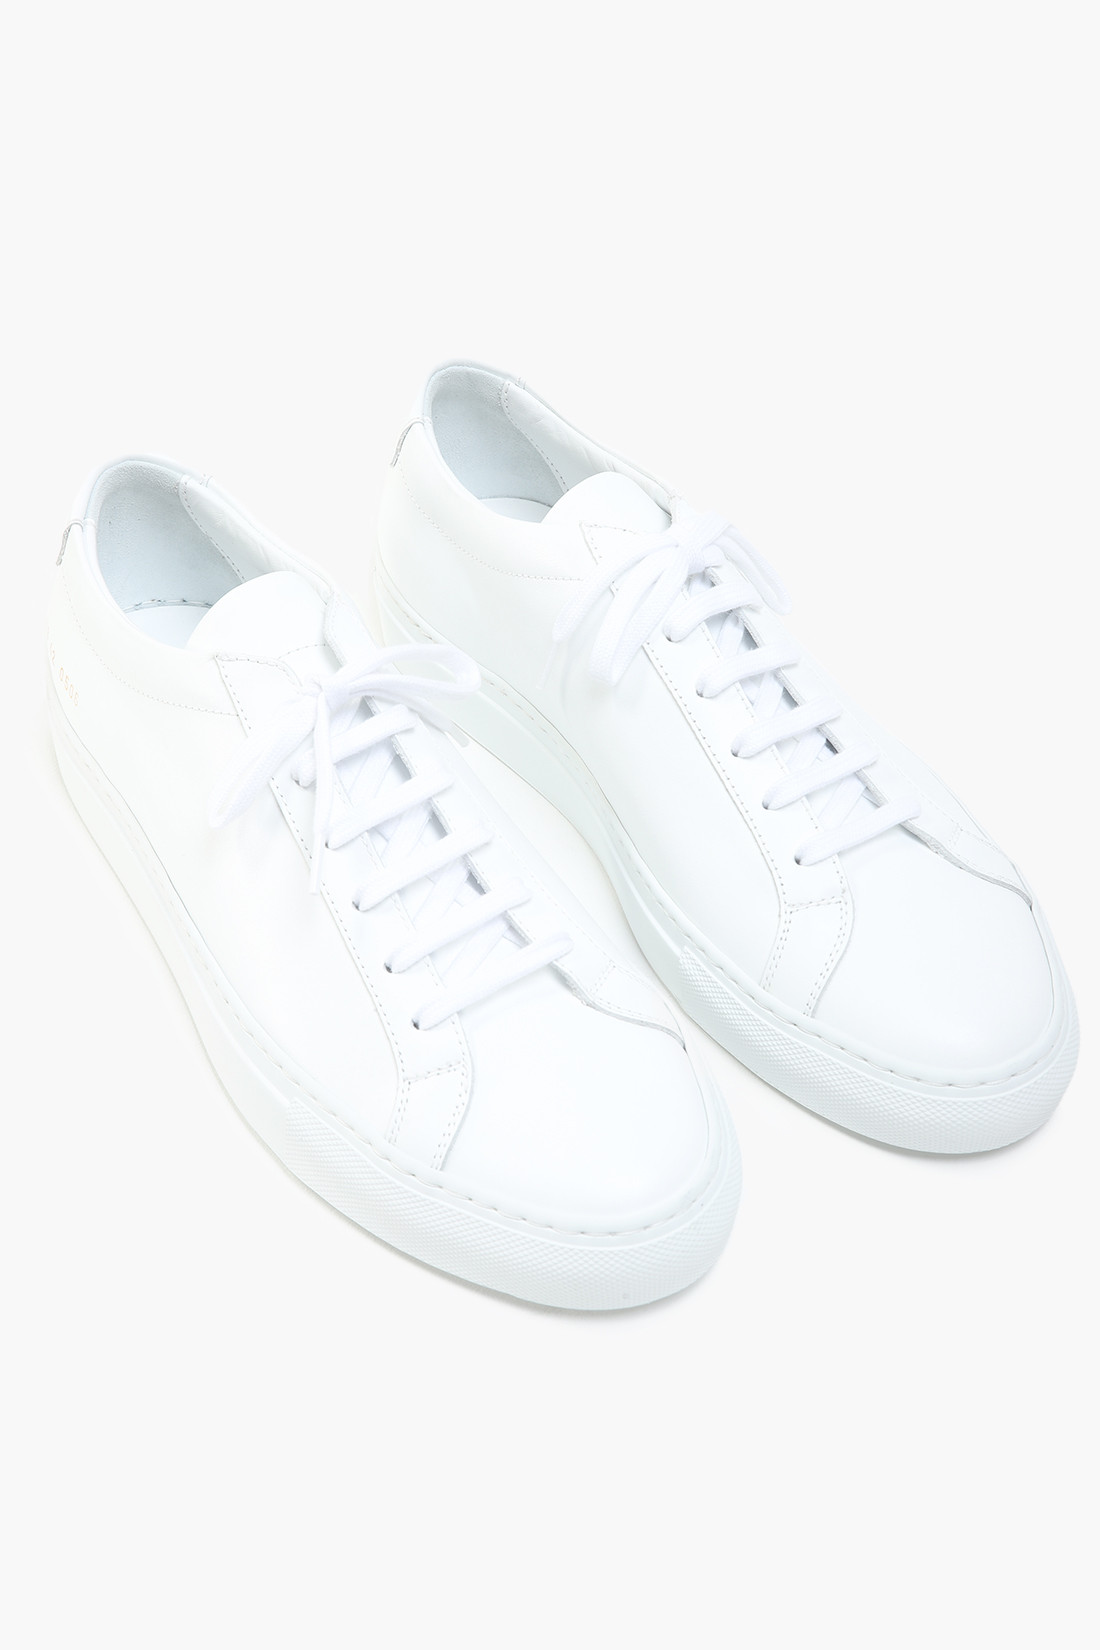 Common Projects Men's Achilles Leather Low-Top Sneakers, White - Bergdorf  Goodman